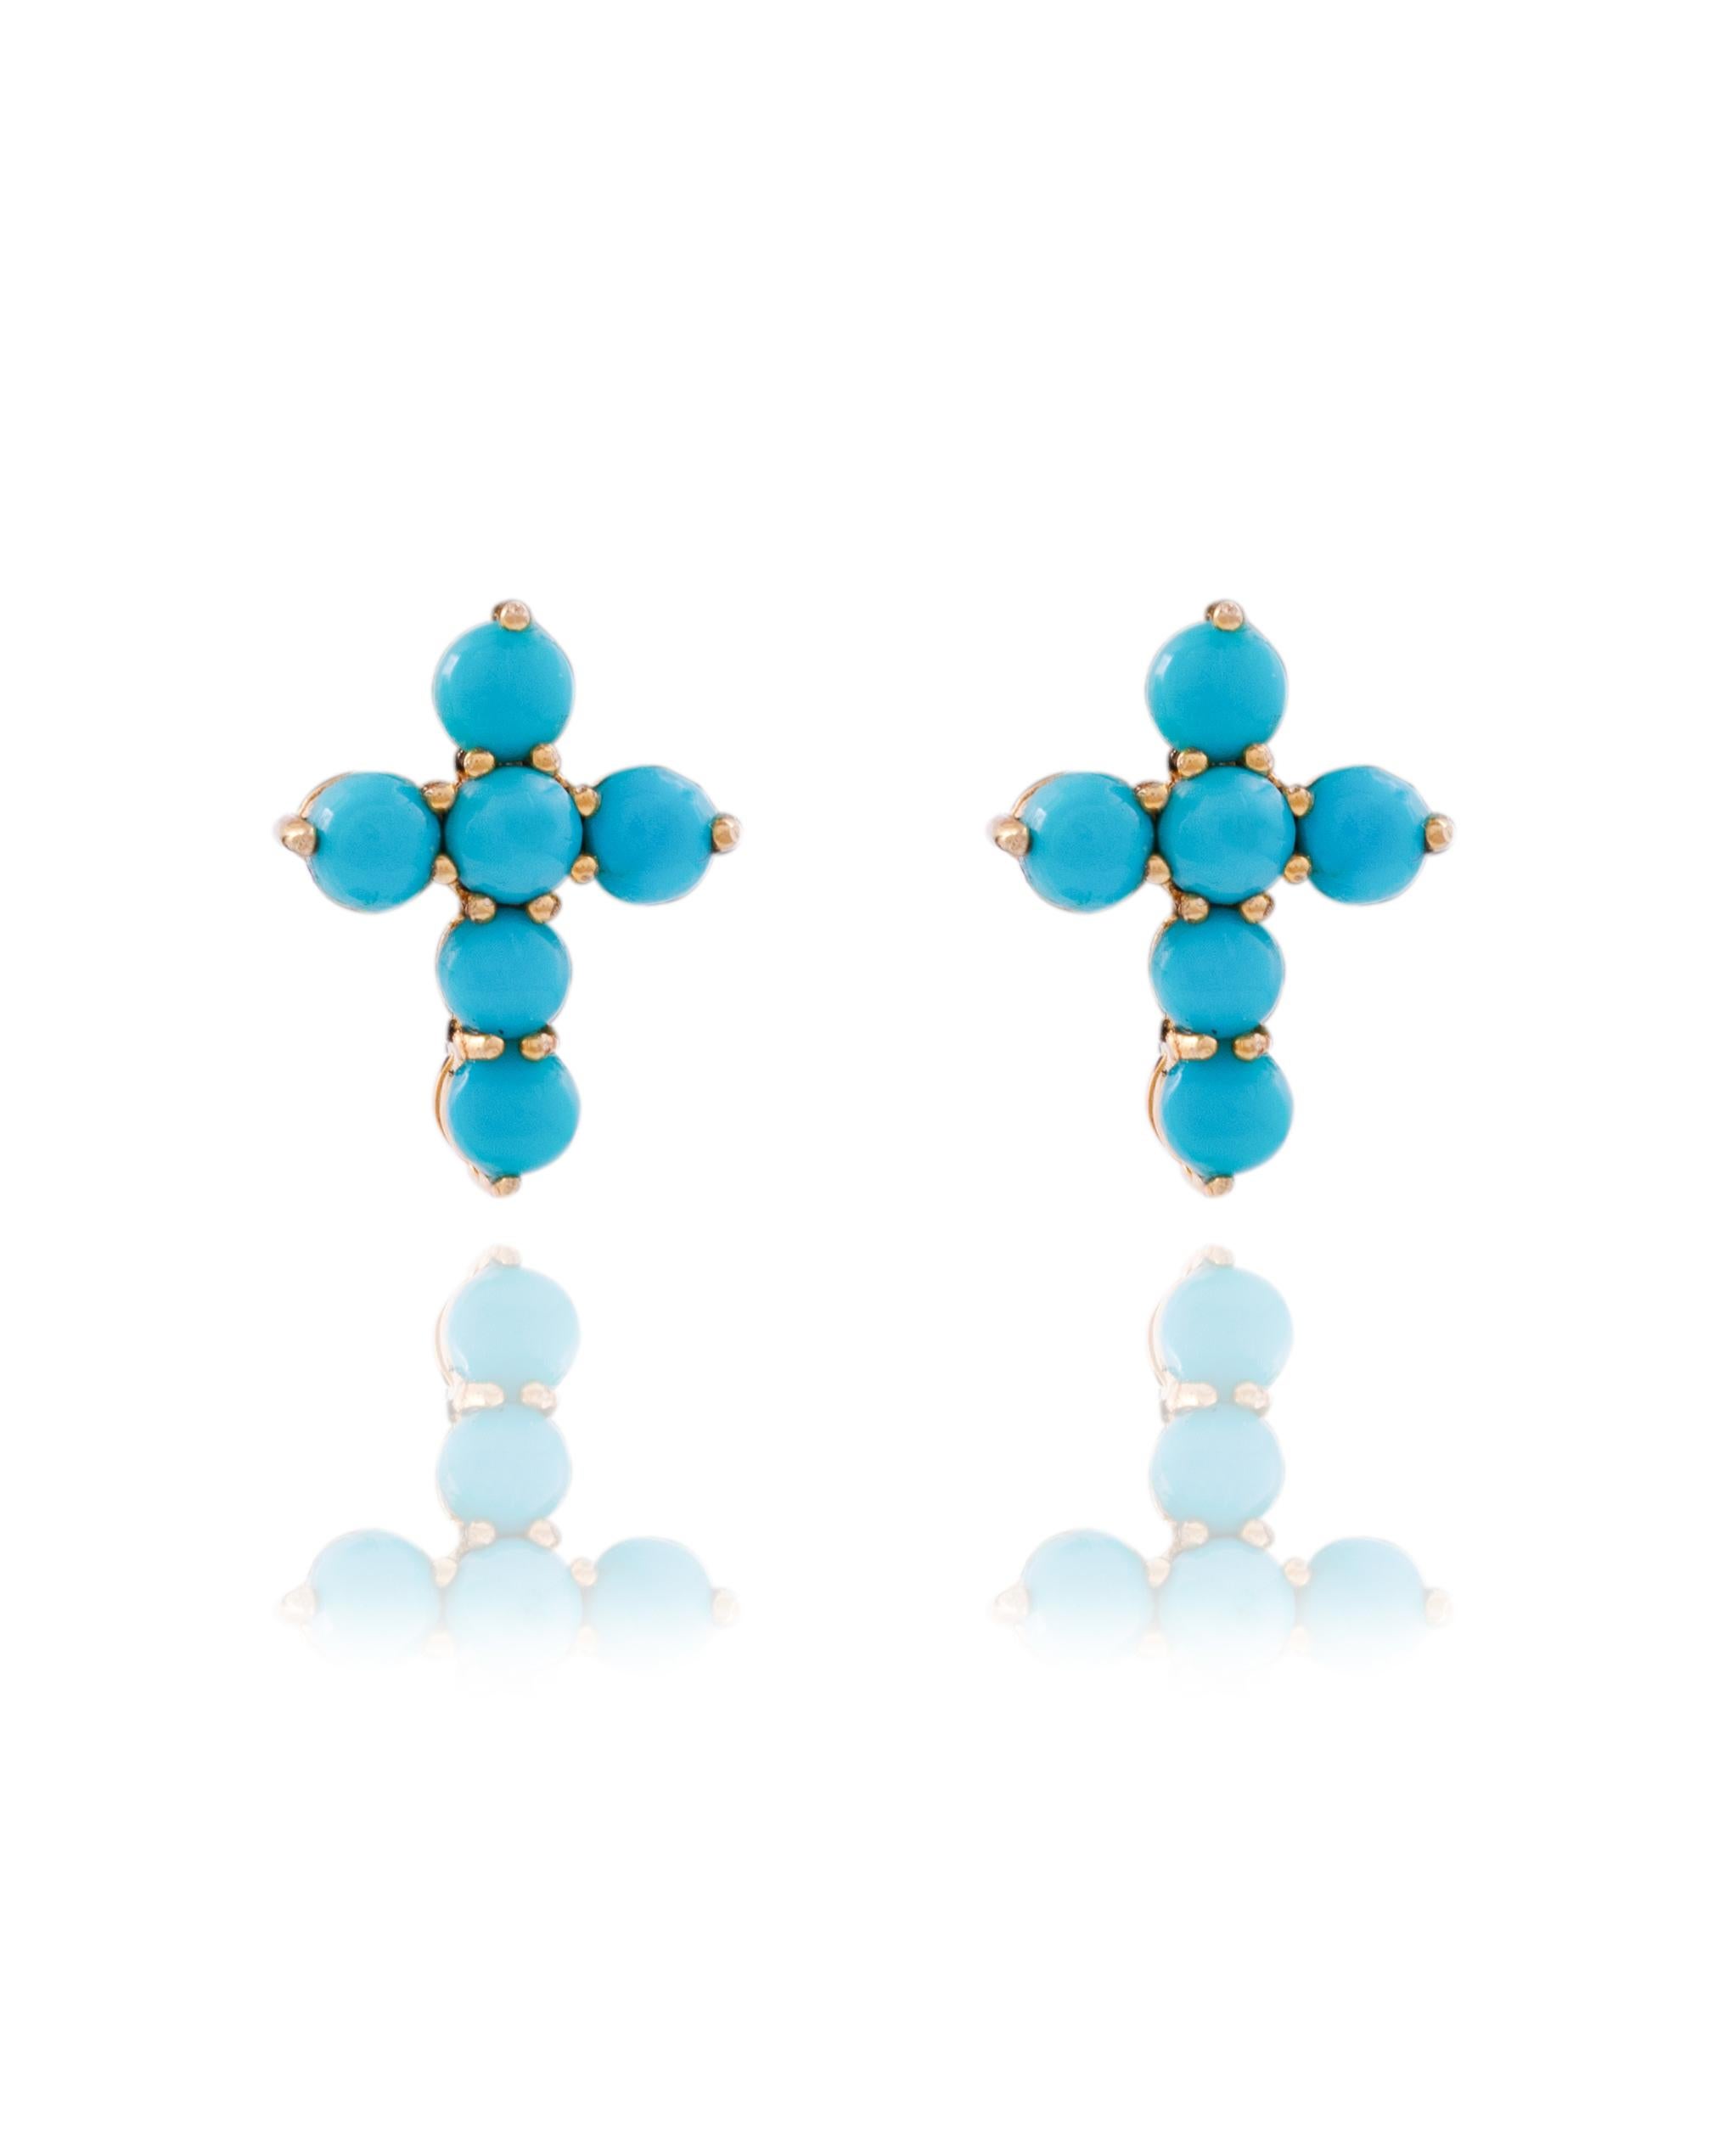 Brilliant Cut Turquoise Stud Earrings in 14k Gold For Sale